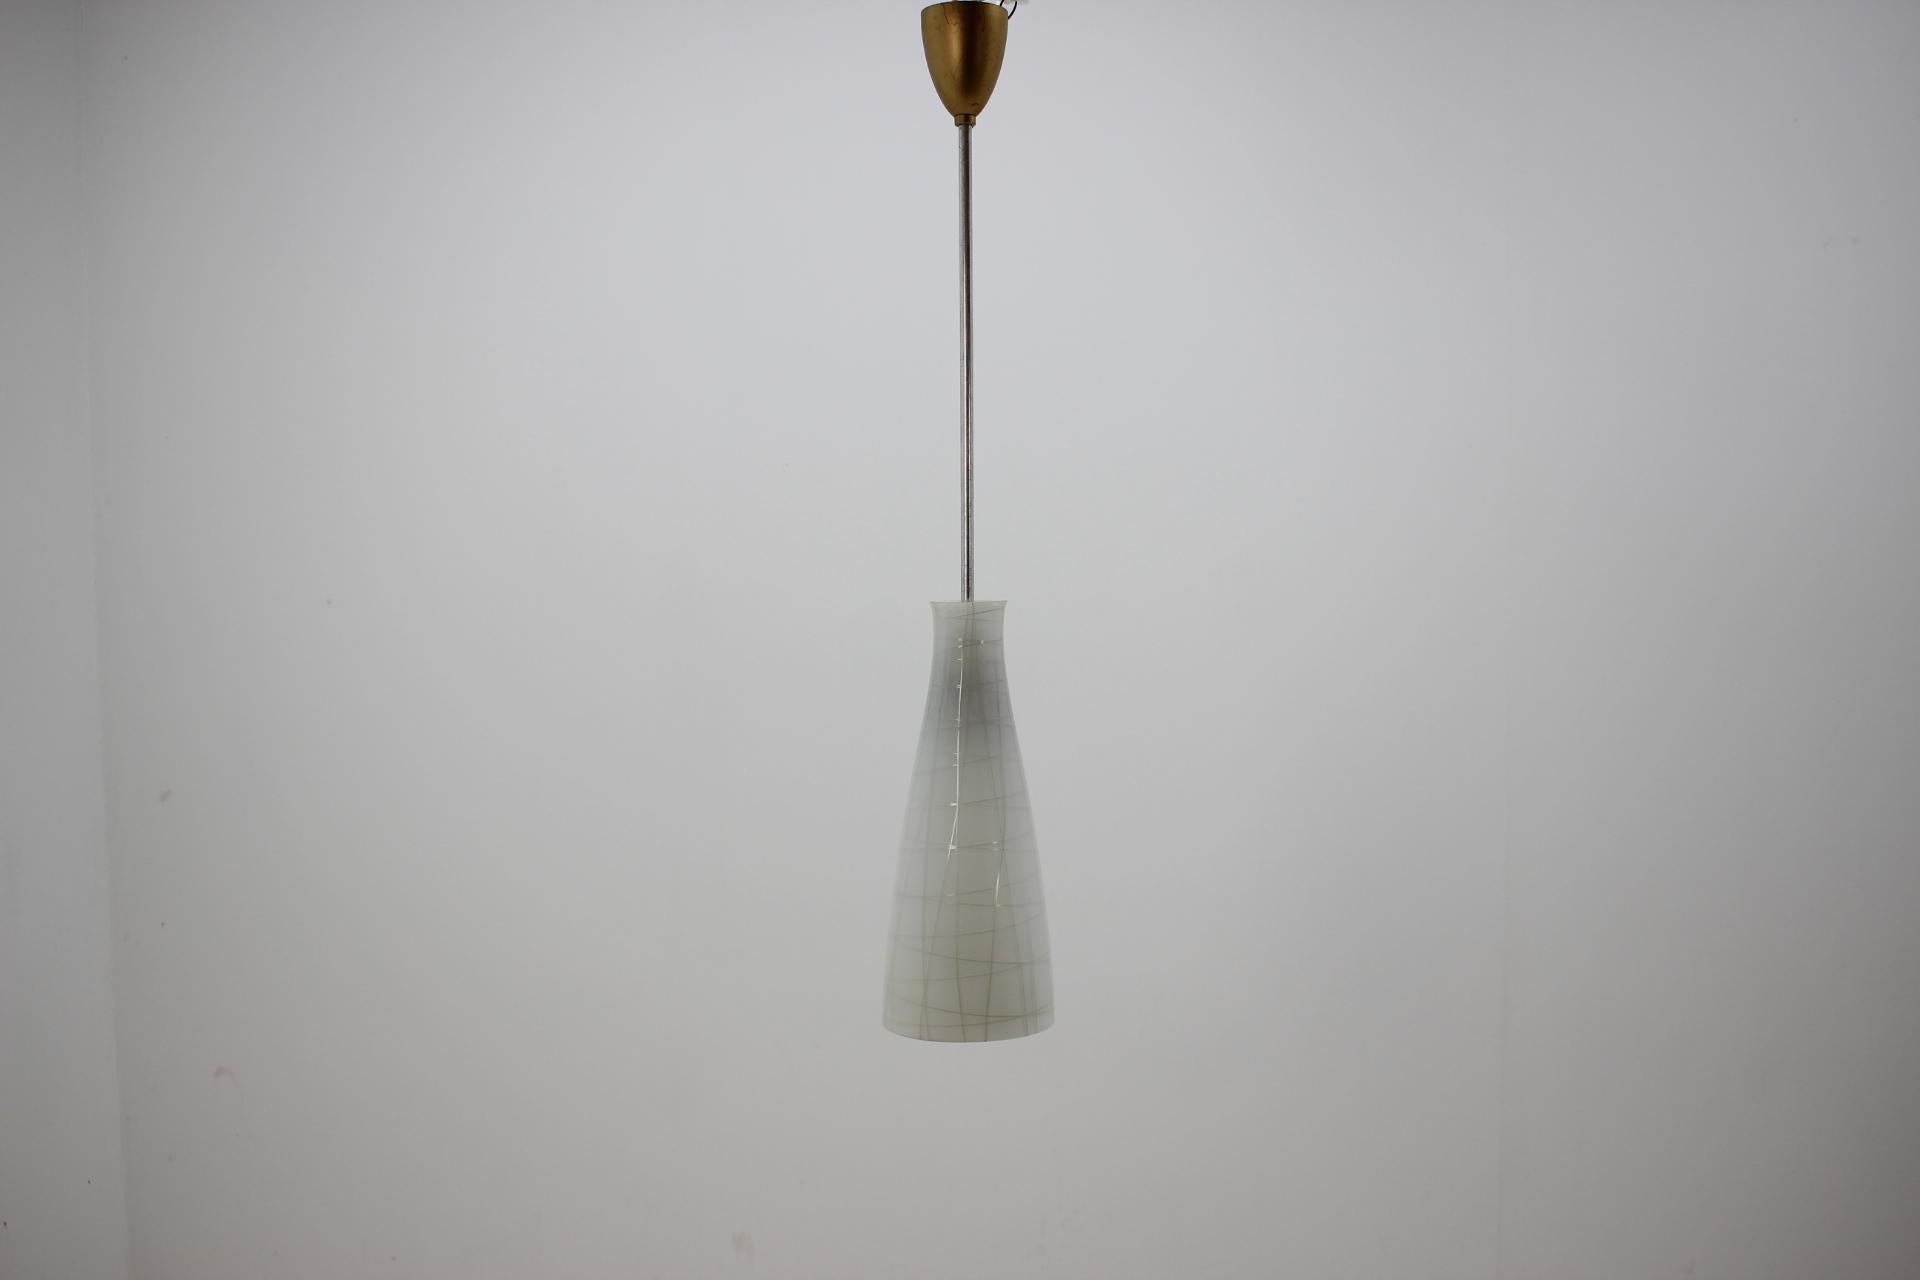 - Made of metal, milk glass
- Original fully functional condition
- Lampshade dimension is 33 x 13 cm.